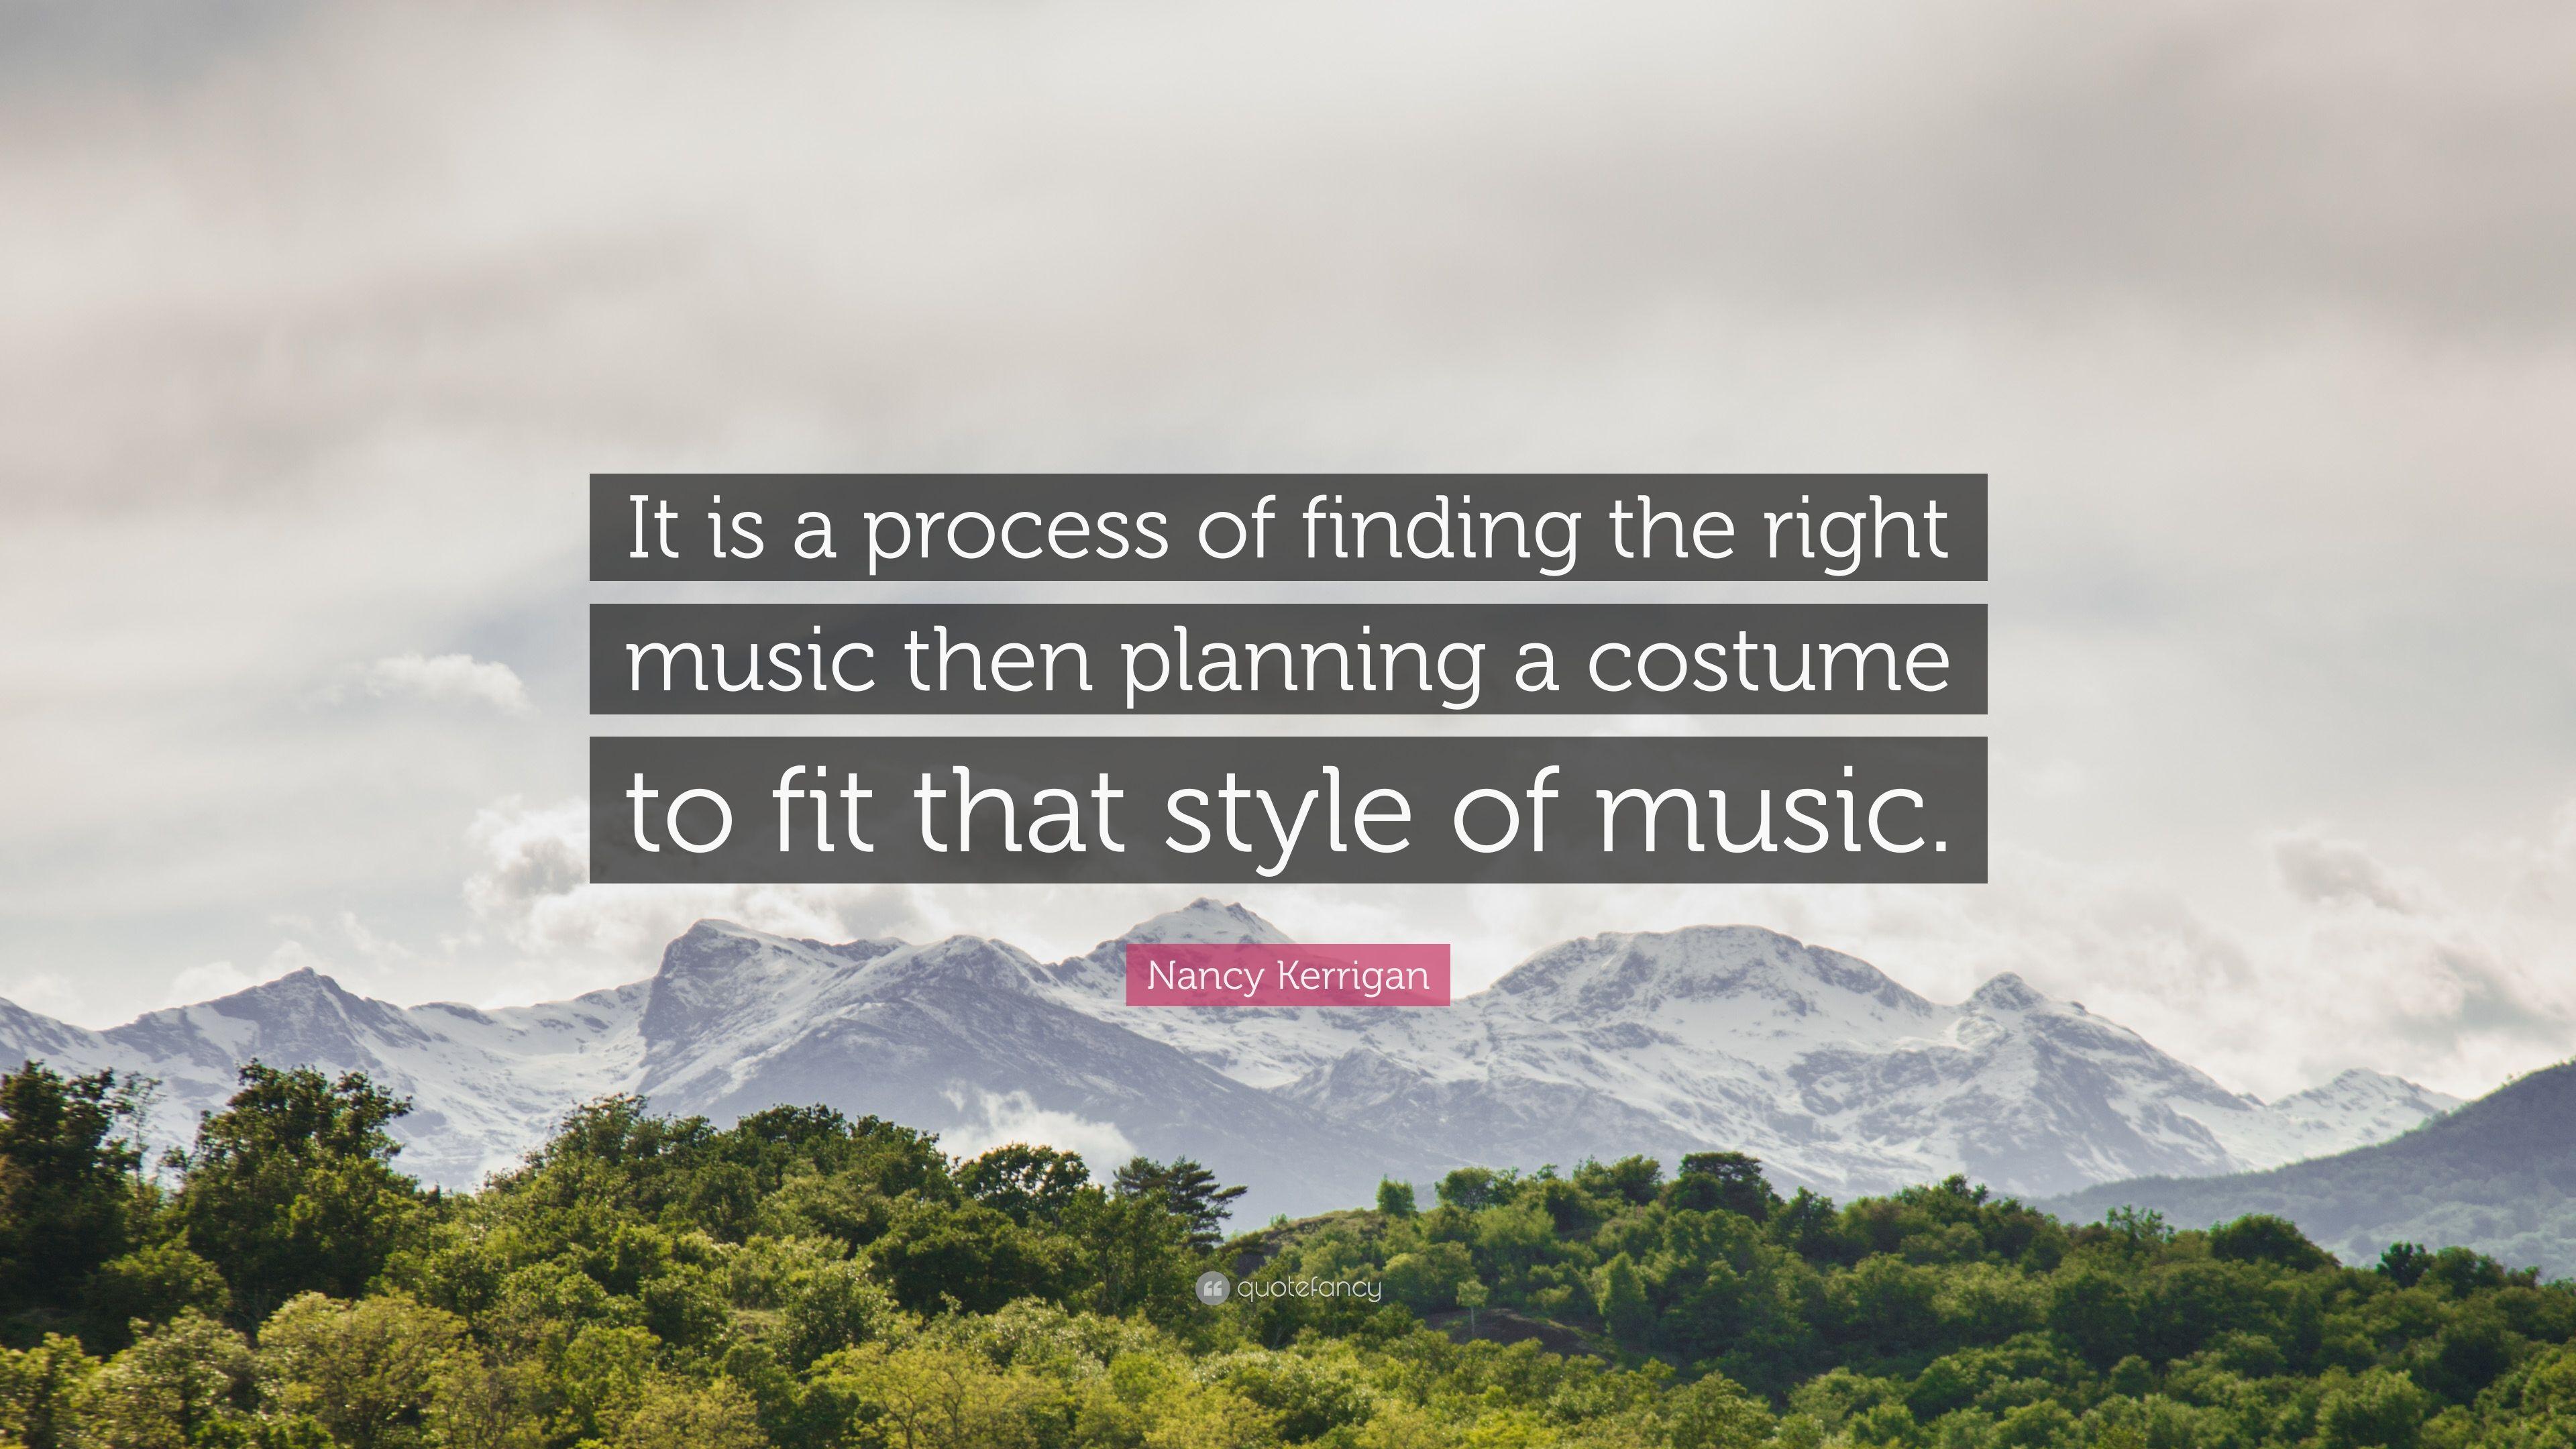 Nancy Kerrigan Quote: “It is a process of finding the right music